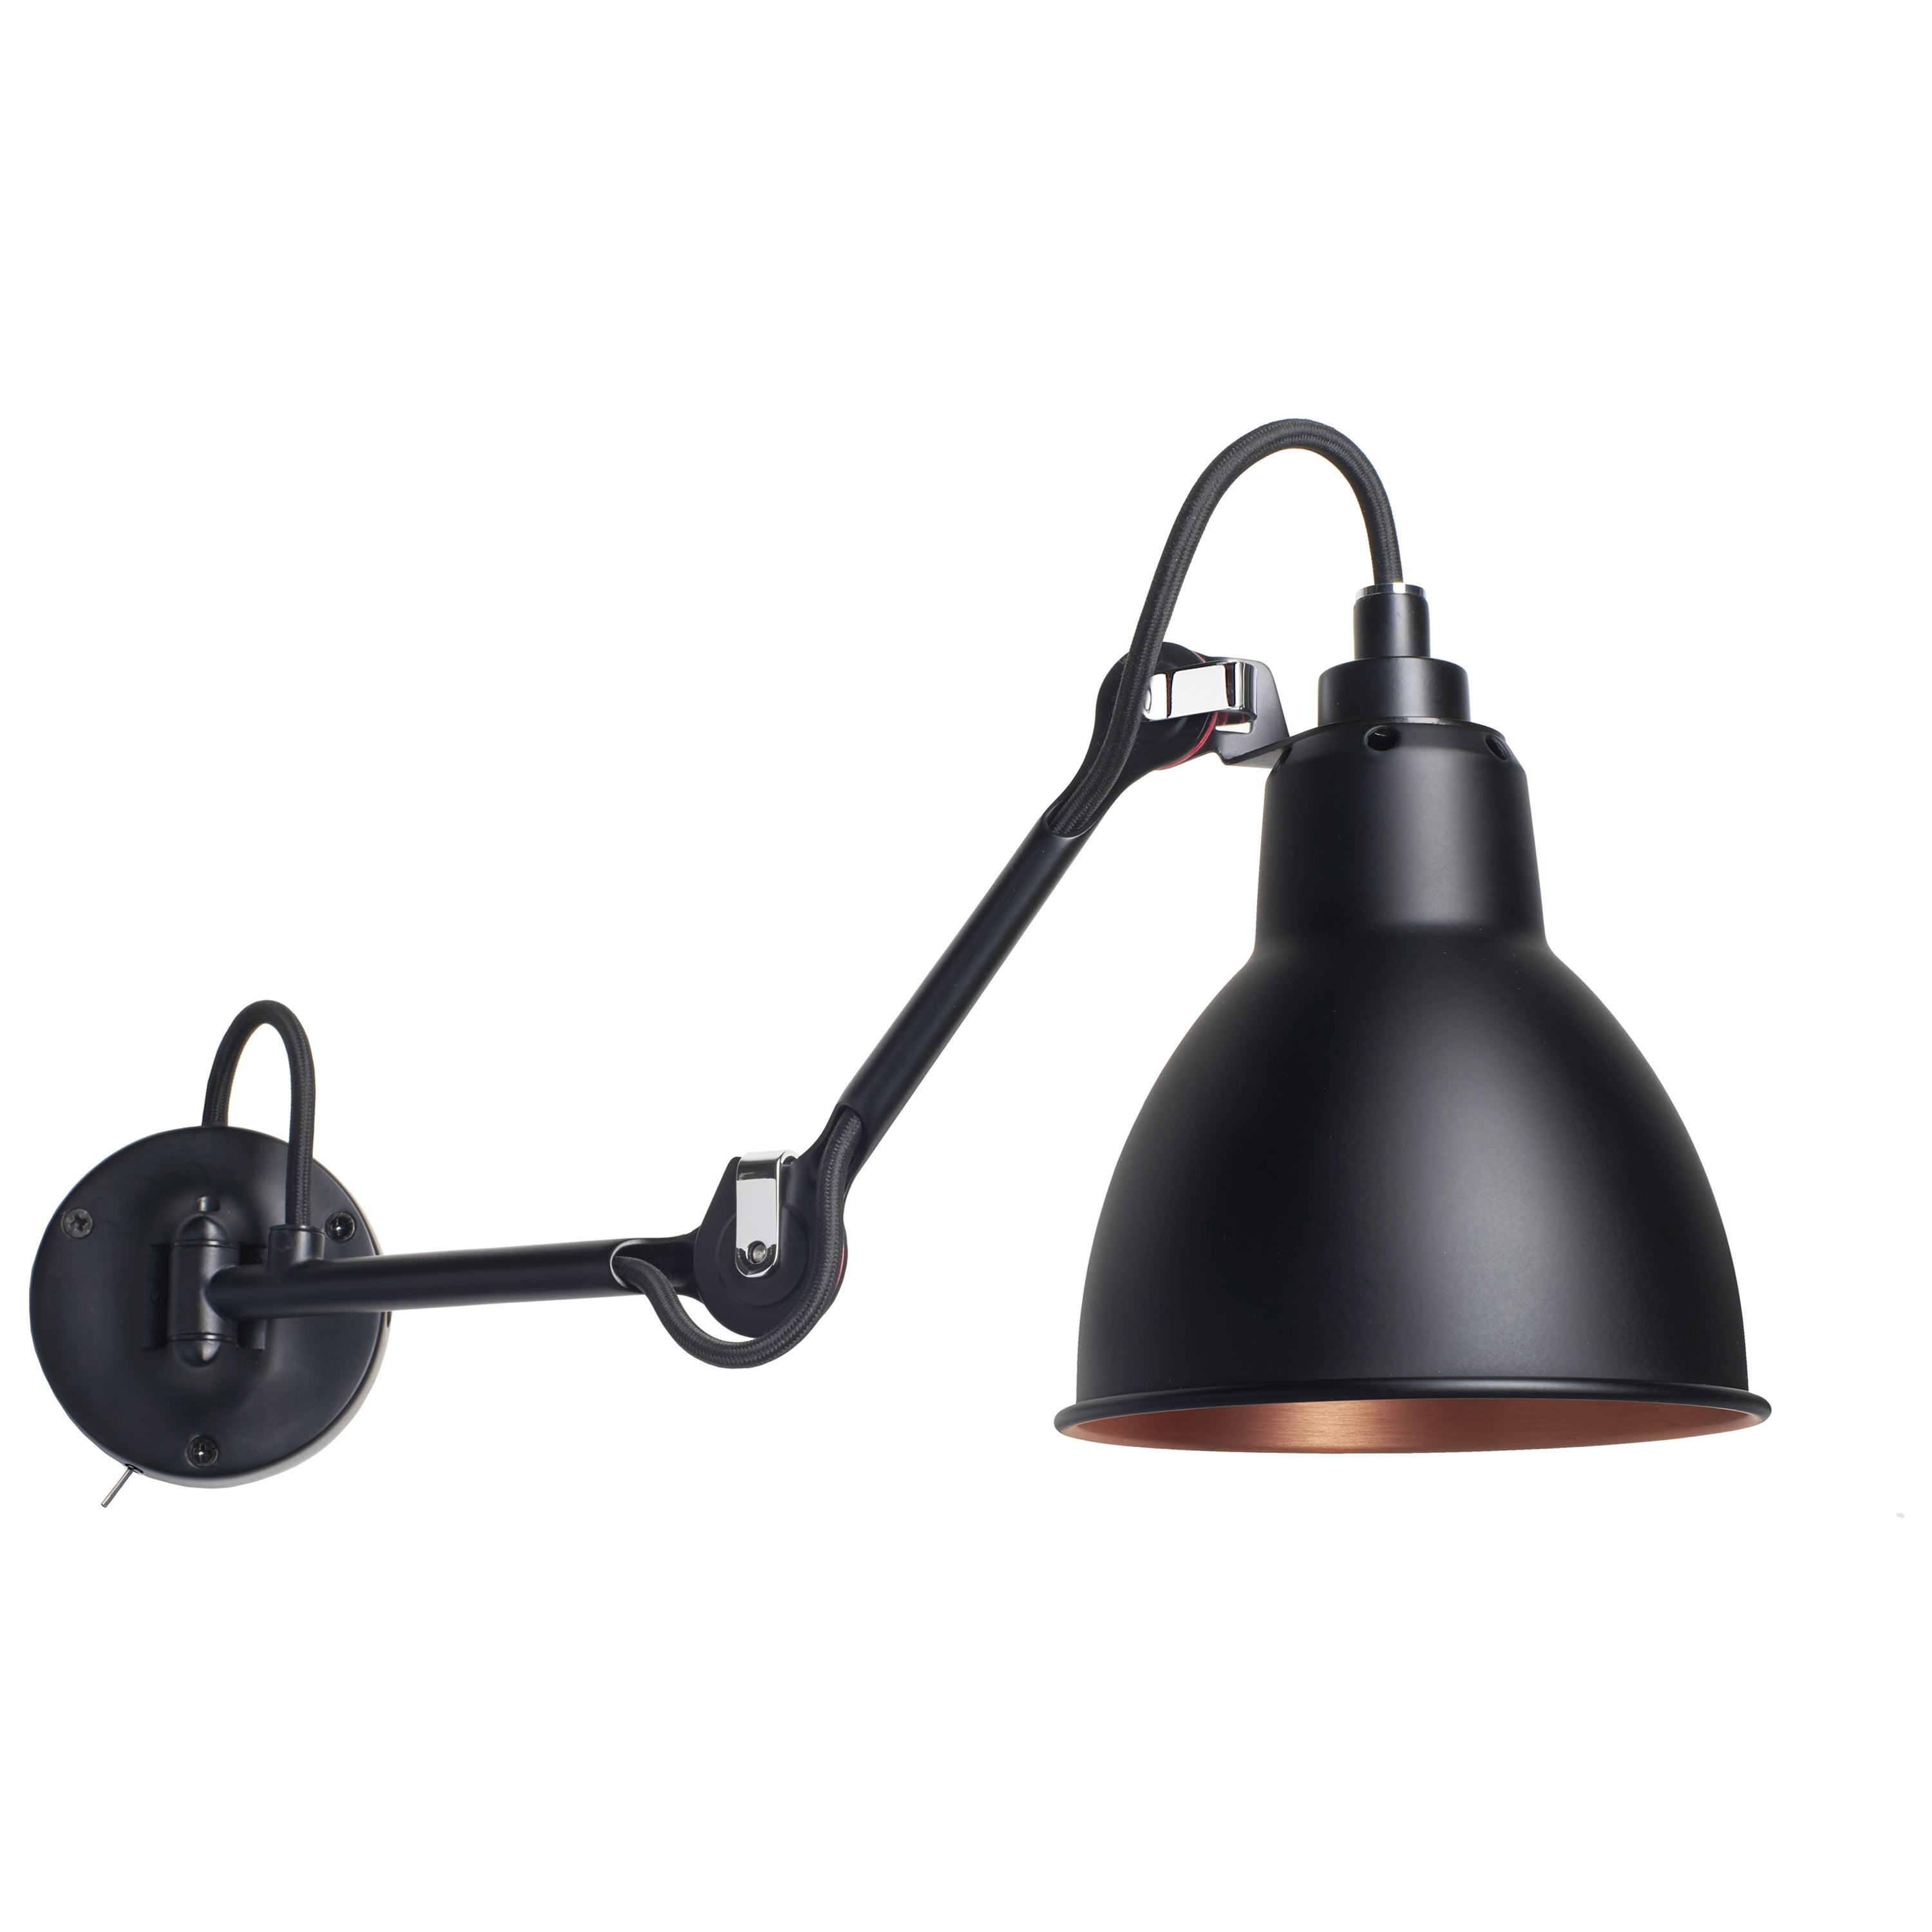 DCW Editions La Lampe Gras N°204 SW Wall Lamp in Black Arm & Black Copper Shade For Sale